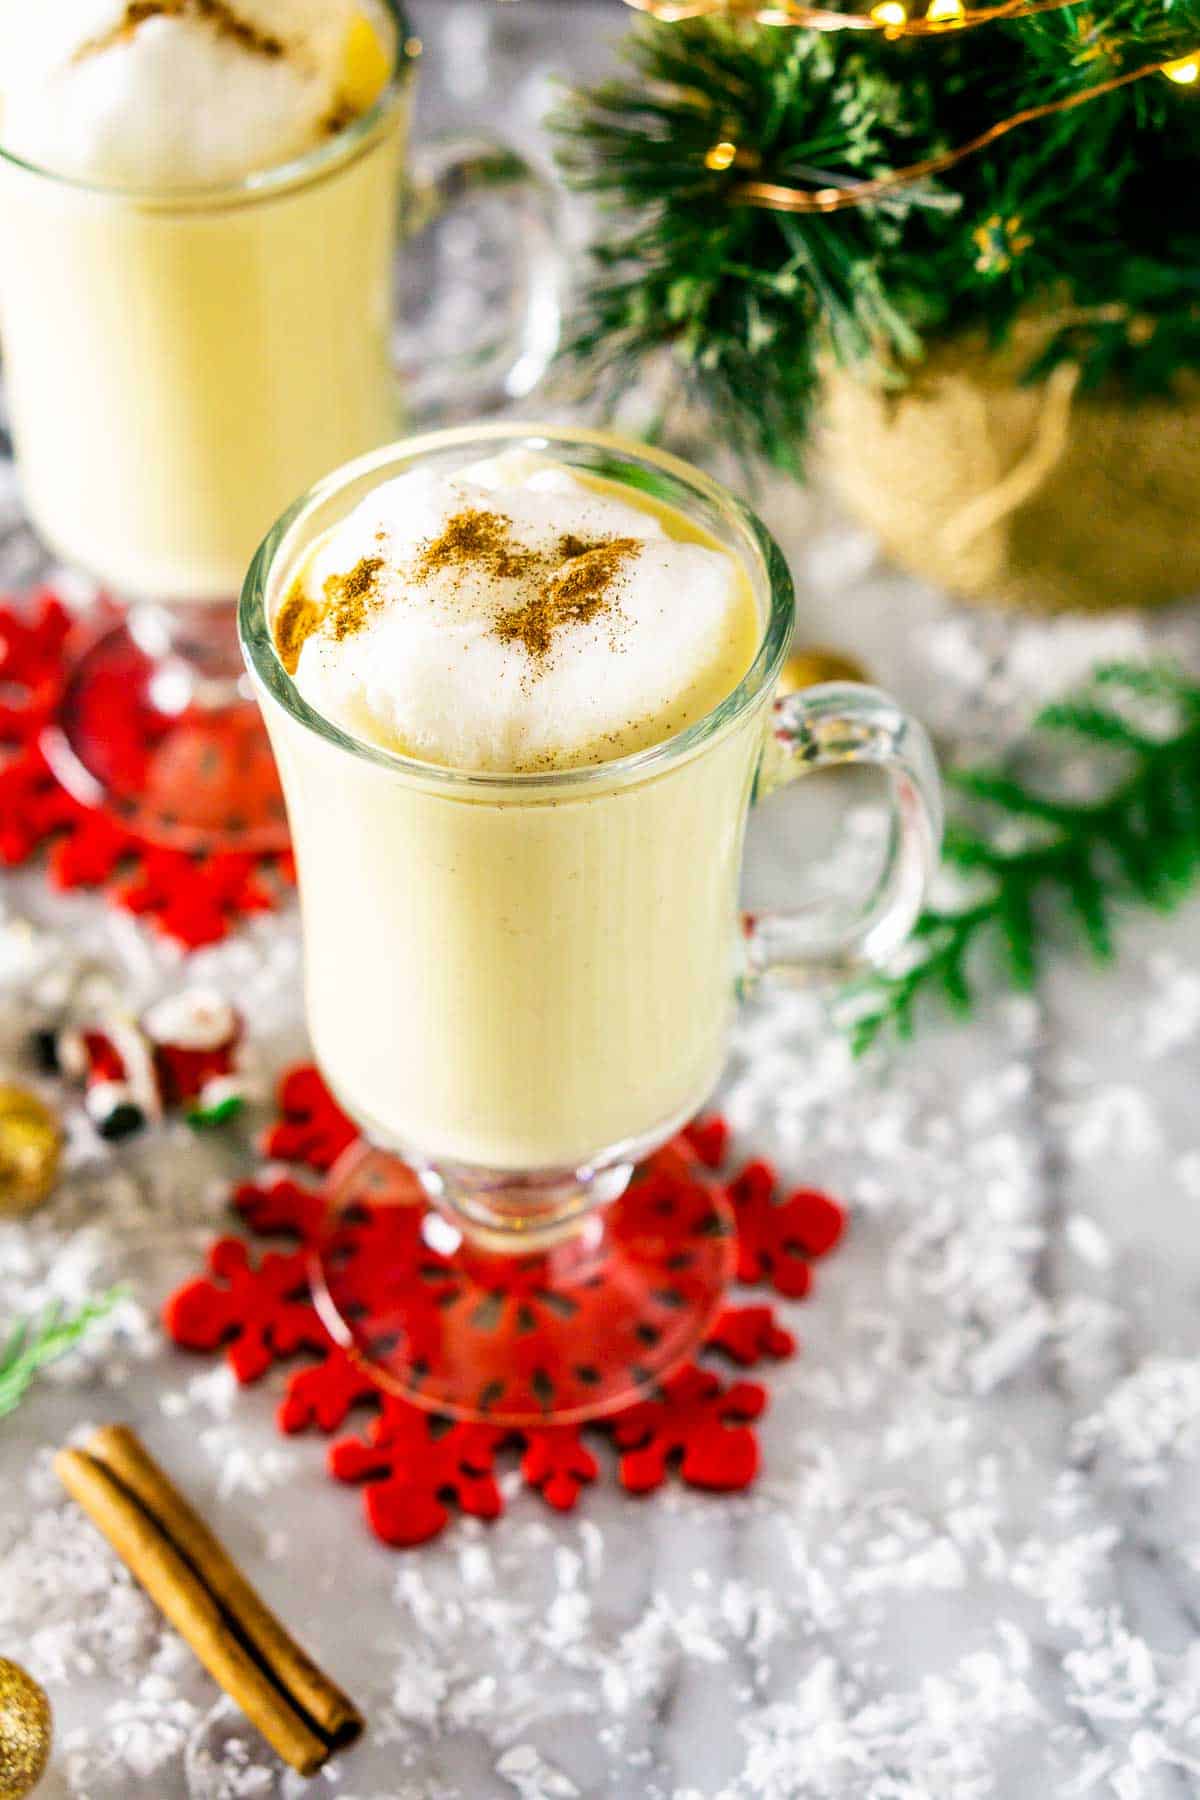 Two mugs of the maple eggnog on red coasters on top of a white countertop with fake snow and Christmas decor around them.